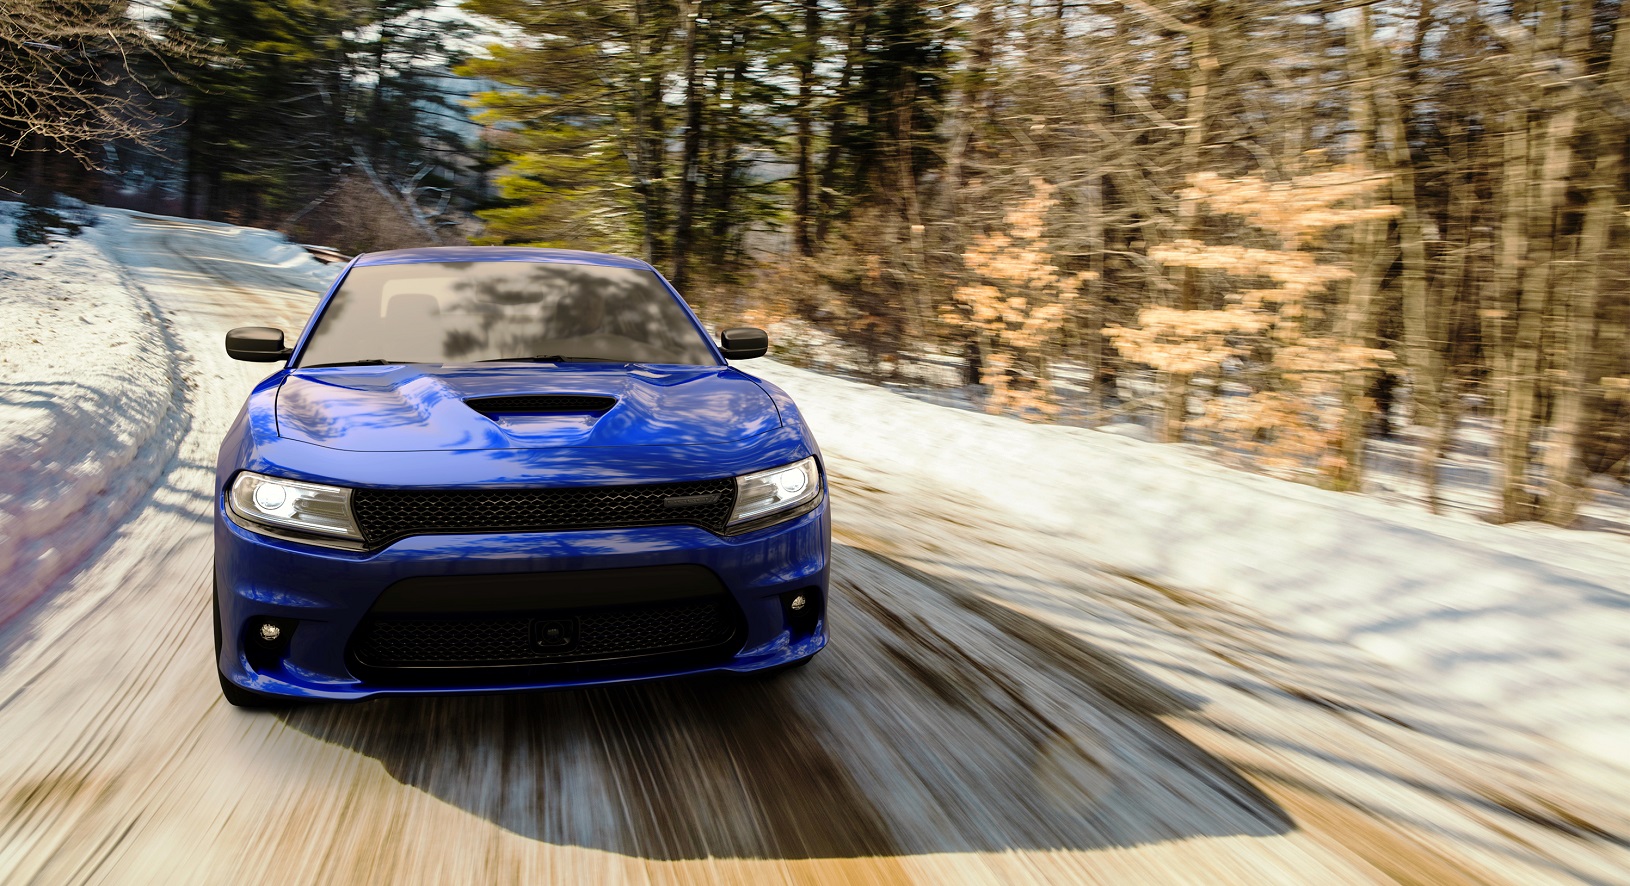 New 2020 Dodge Charger GT all-wheel drive (AWD) features class-exclusive all-wheel-drive system with active transfer case and front-axle disconnect, delivering year-round performance combined with muscle car styling